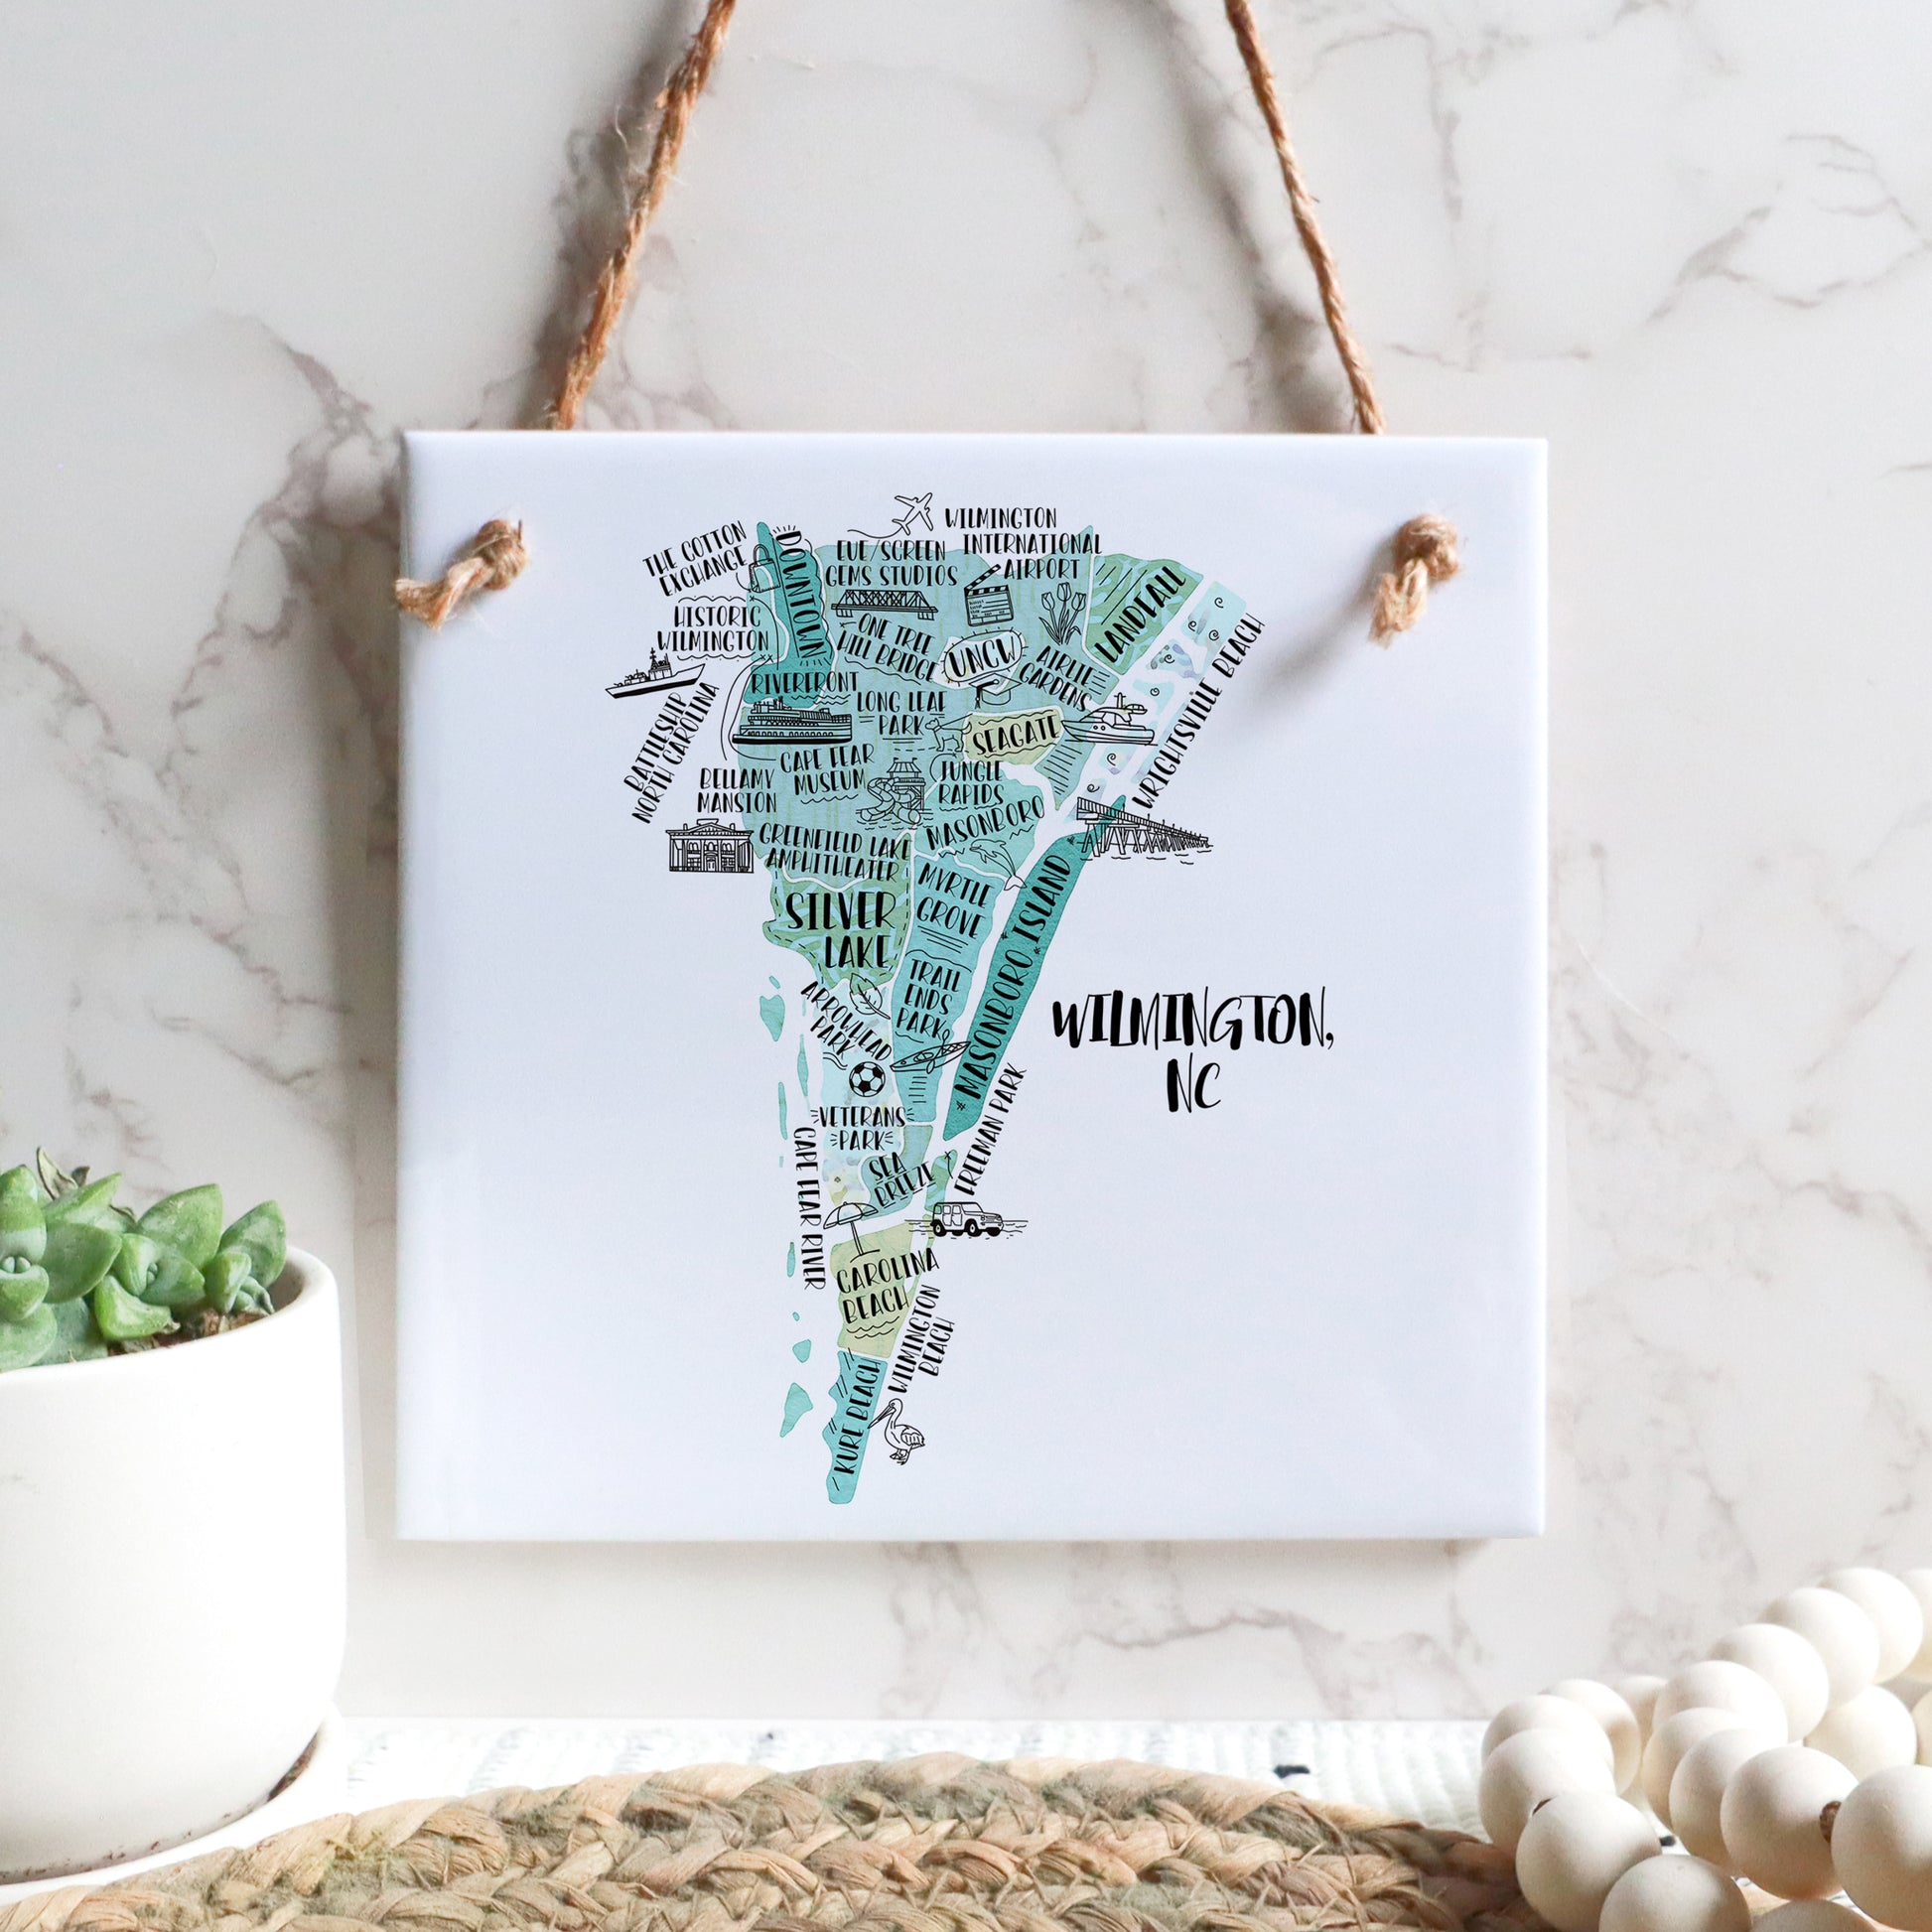 A hand-drawn tourist map of Wilmington North Carolina on a square tile sign hanging on a wall - in the color teal